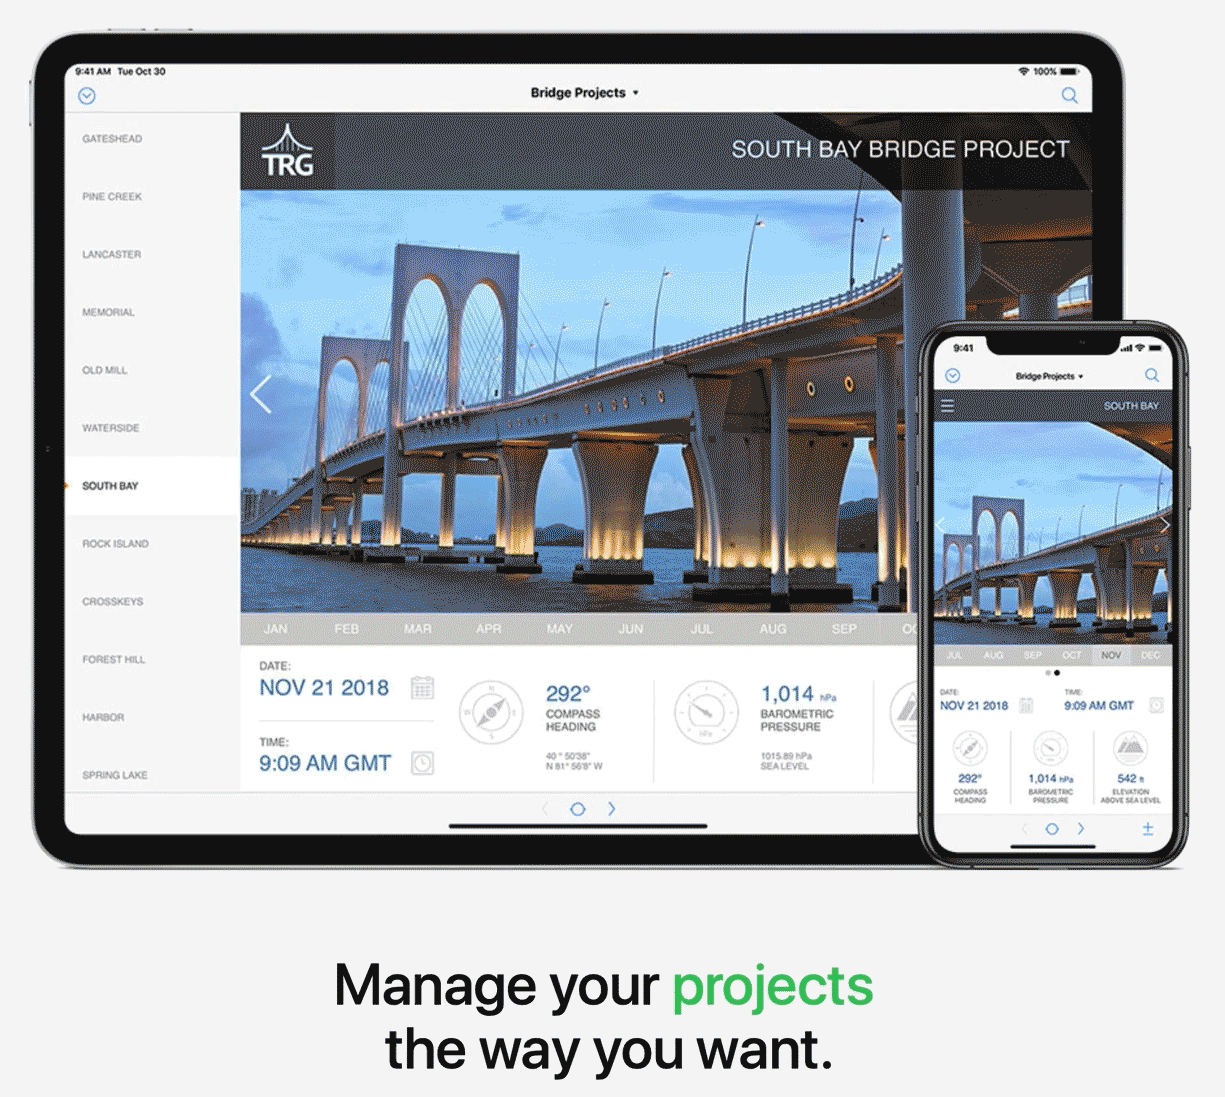 Manage your projects, content, inventory, events, assets, contacts, and invoices the way you want.